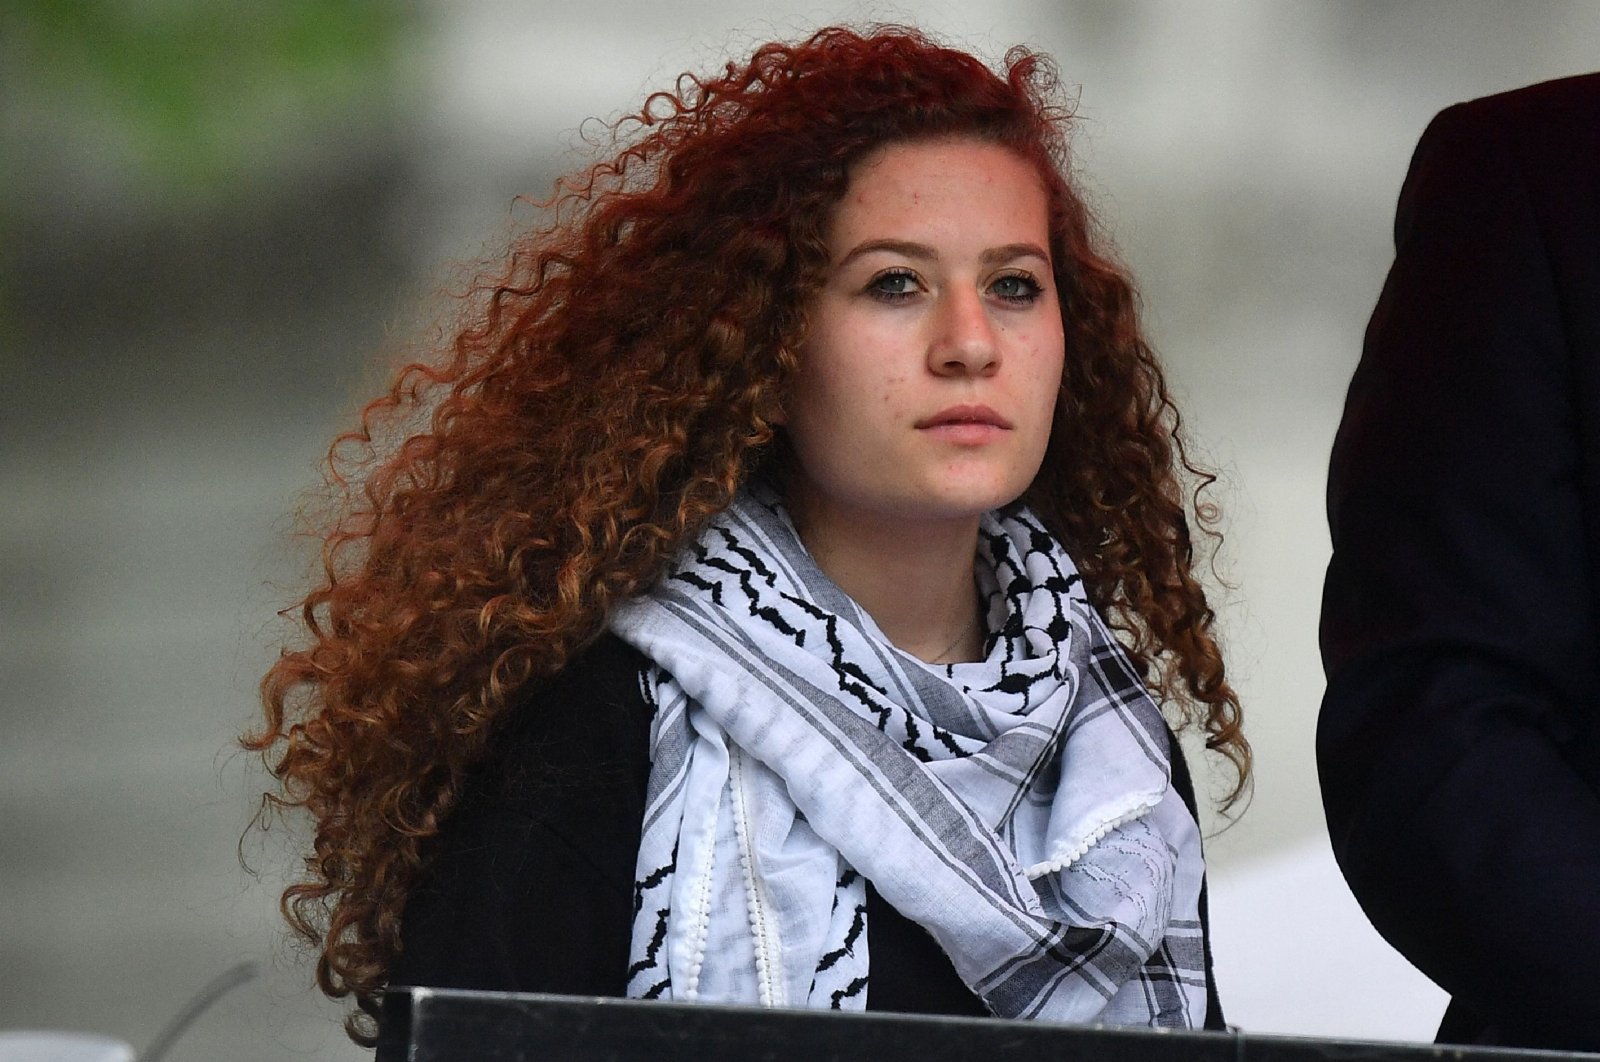 Palestinian activist Ahed Tamimi waits to speak at a rally calling for justice for Palestinians, central London, U.K., May 11, 2019. (AFP Photo)